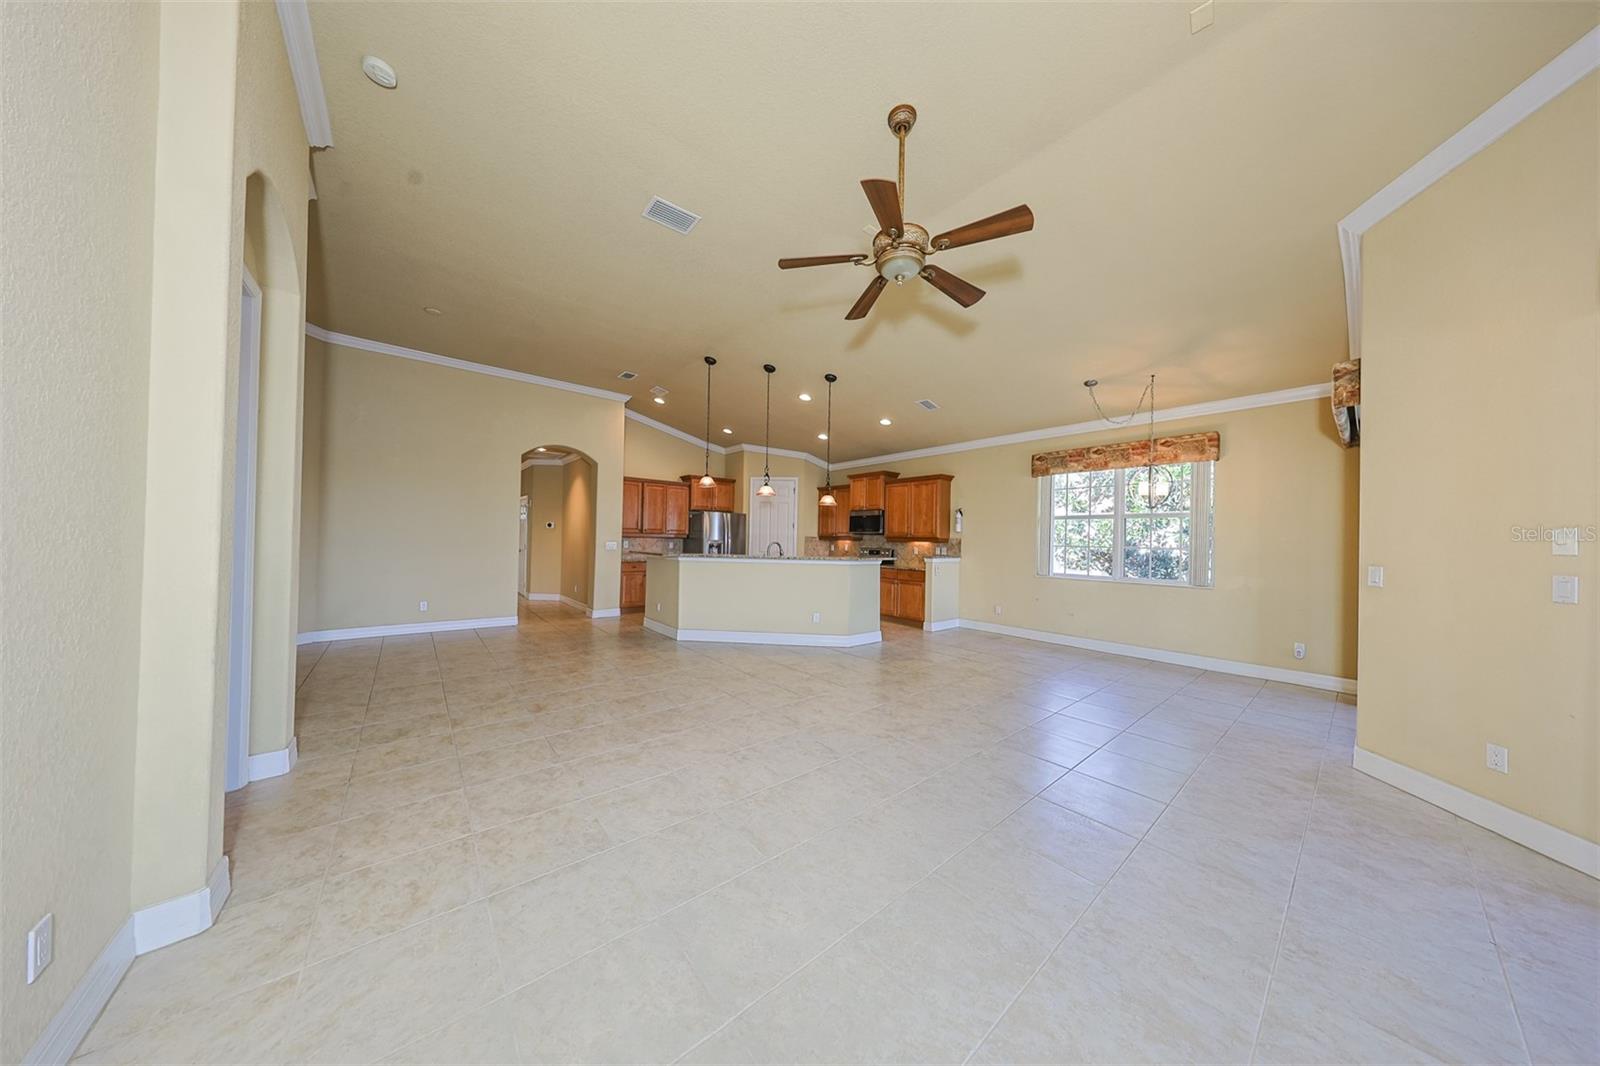 A view of the large open floor plan.  There is plenty of space to entertain and have guests.